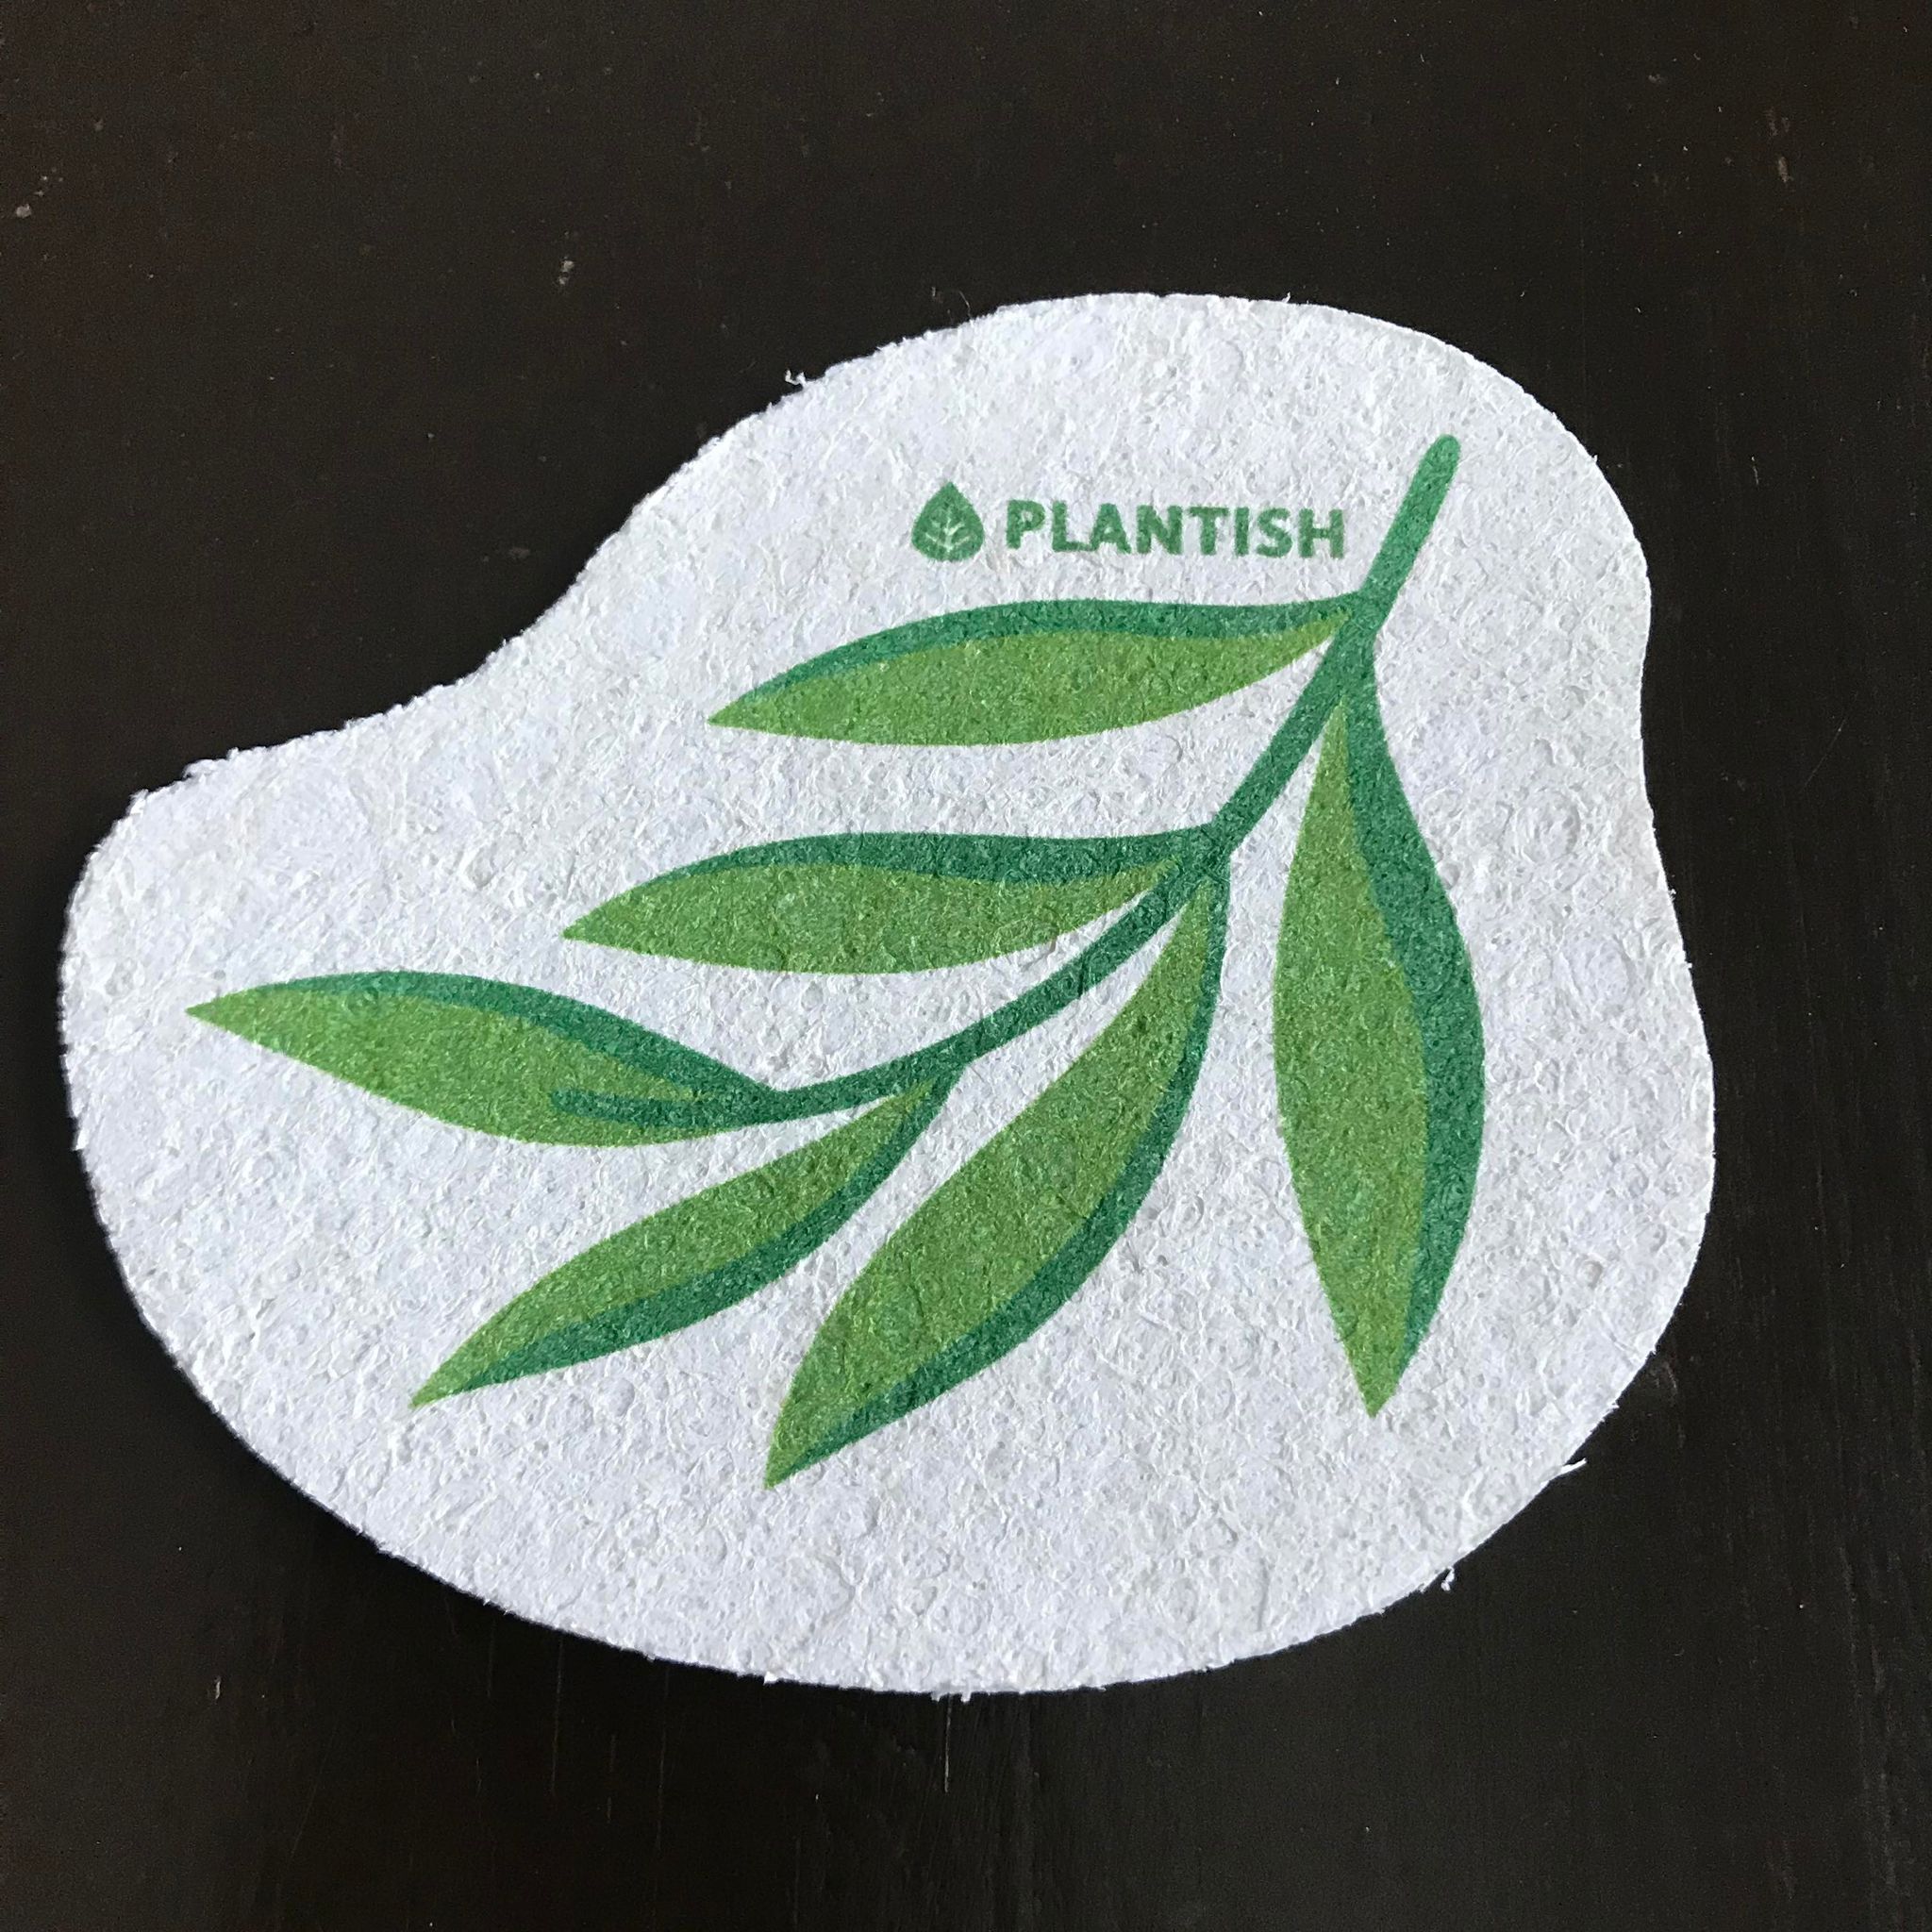 Compostable  cellulose sponge with a eucalyptus leaf  made by the Canadian brand Plantish